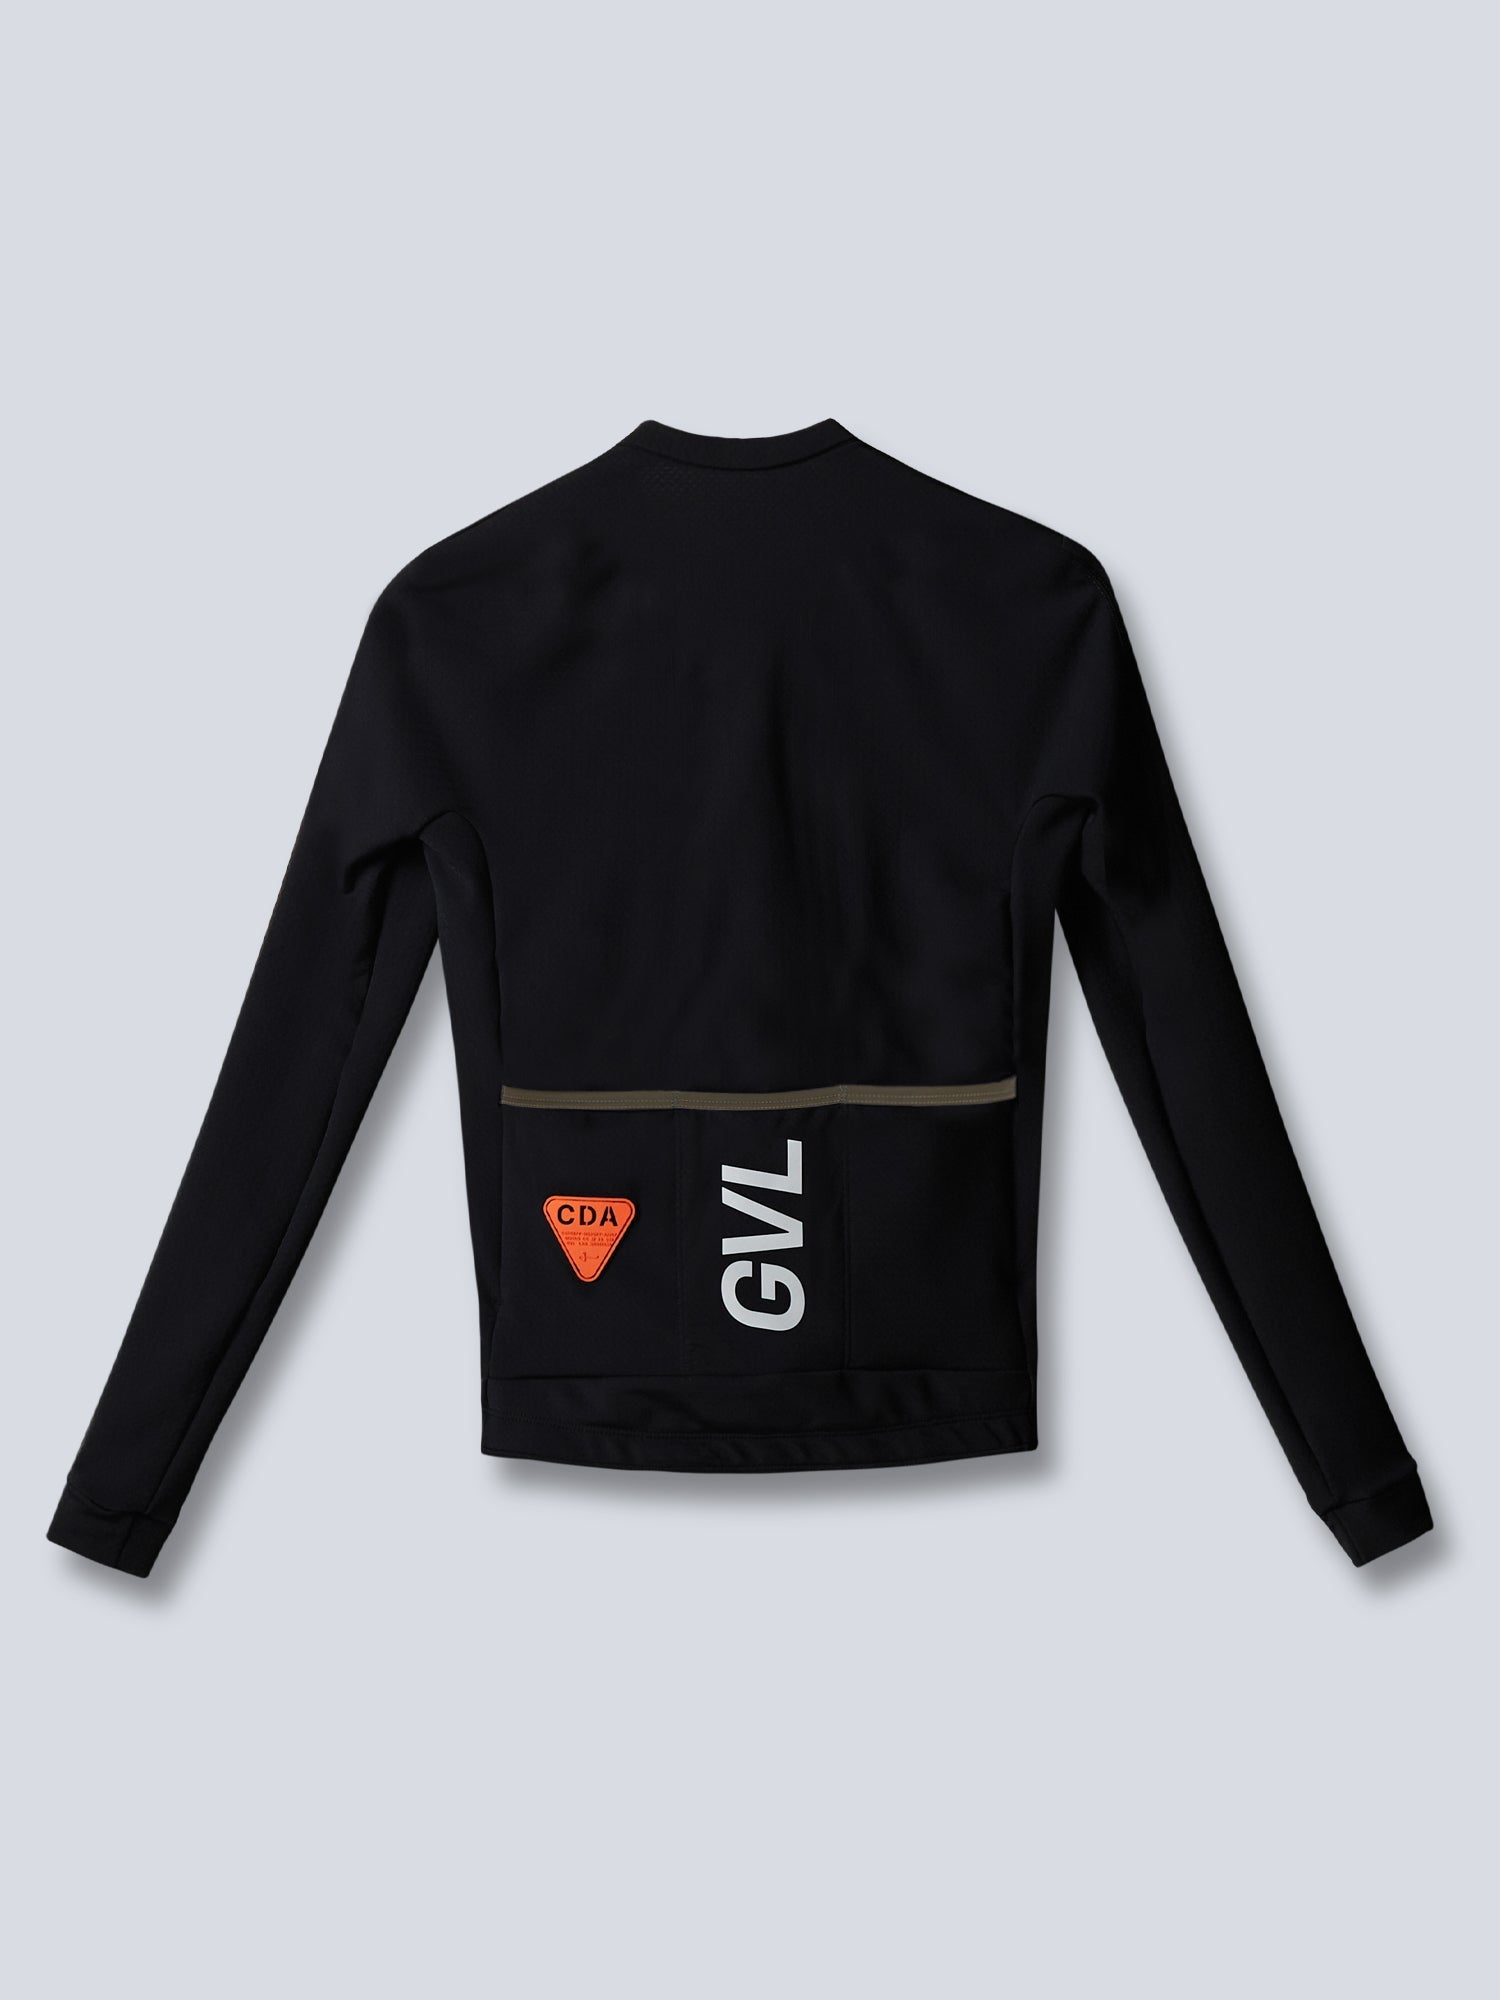 Givelo C.D.A Thermal Fiets Jersey Heren